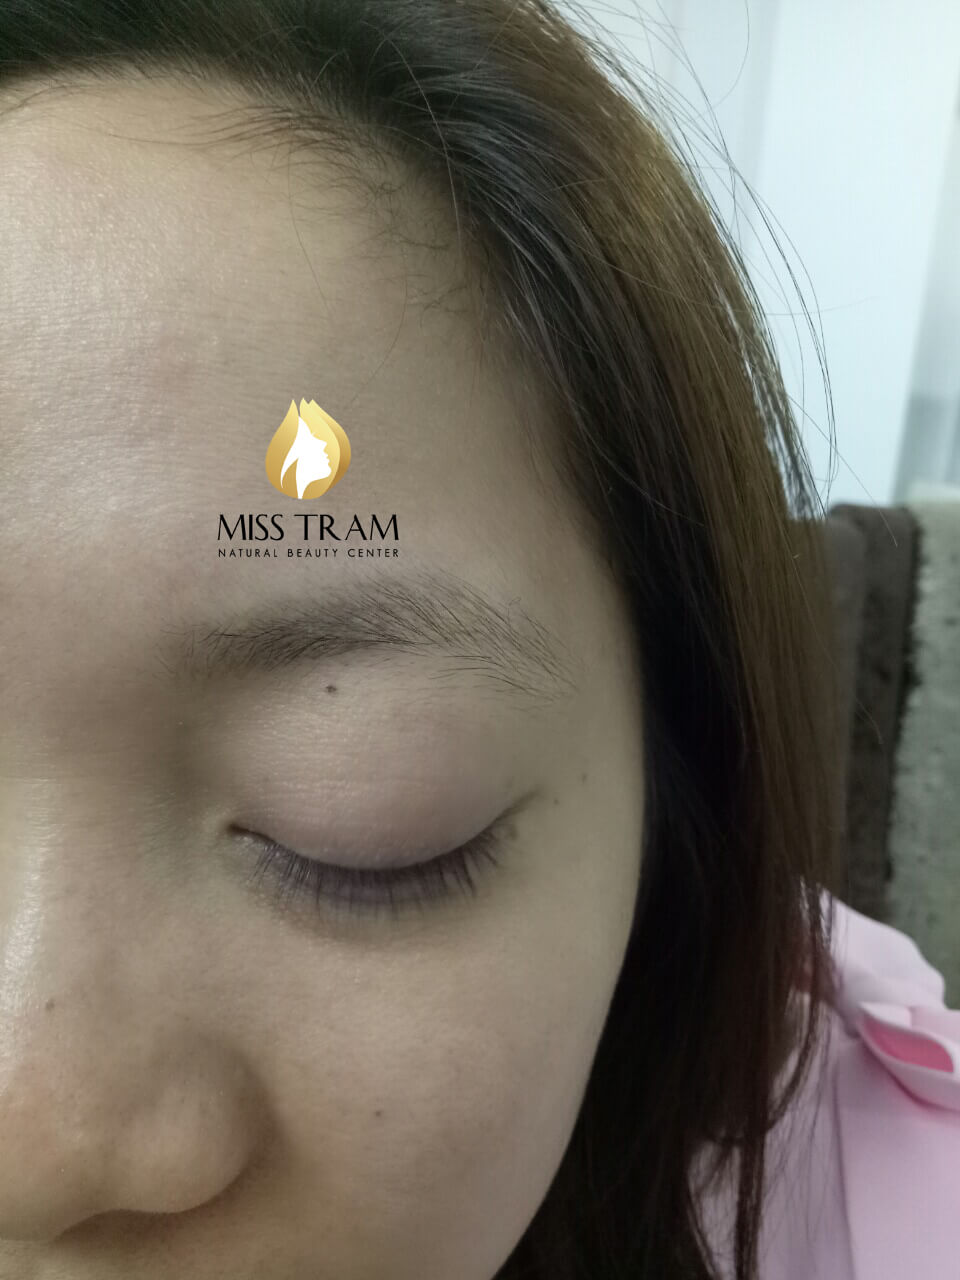 Before and After Eyebrow Removal Technology Leaves No Scars With Yag Laser Technology 13